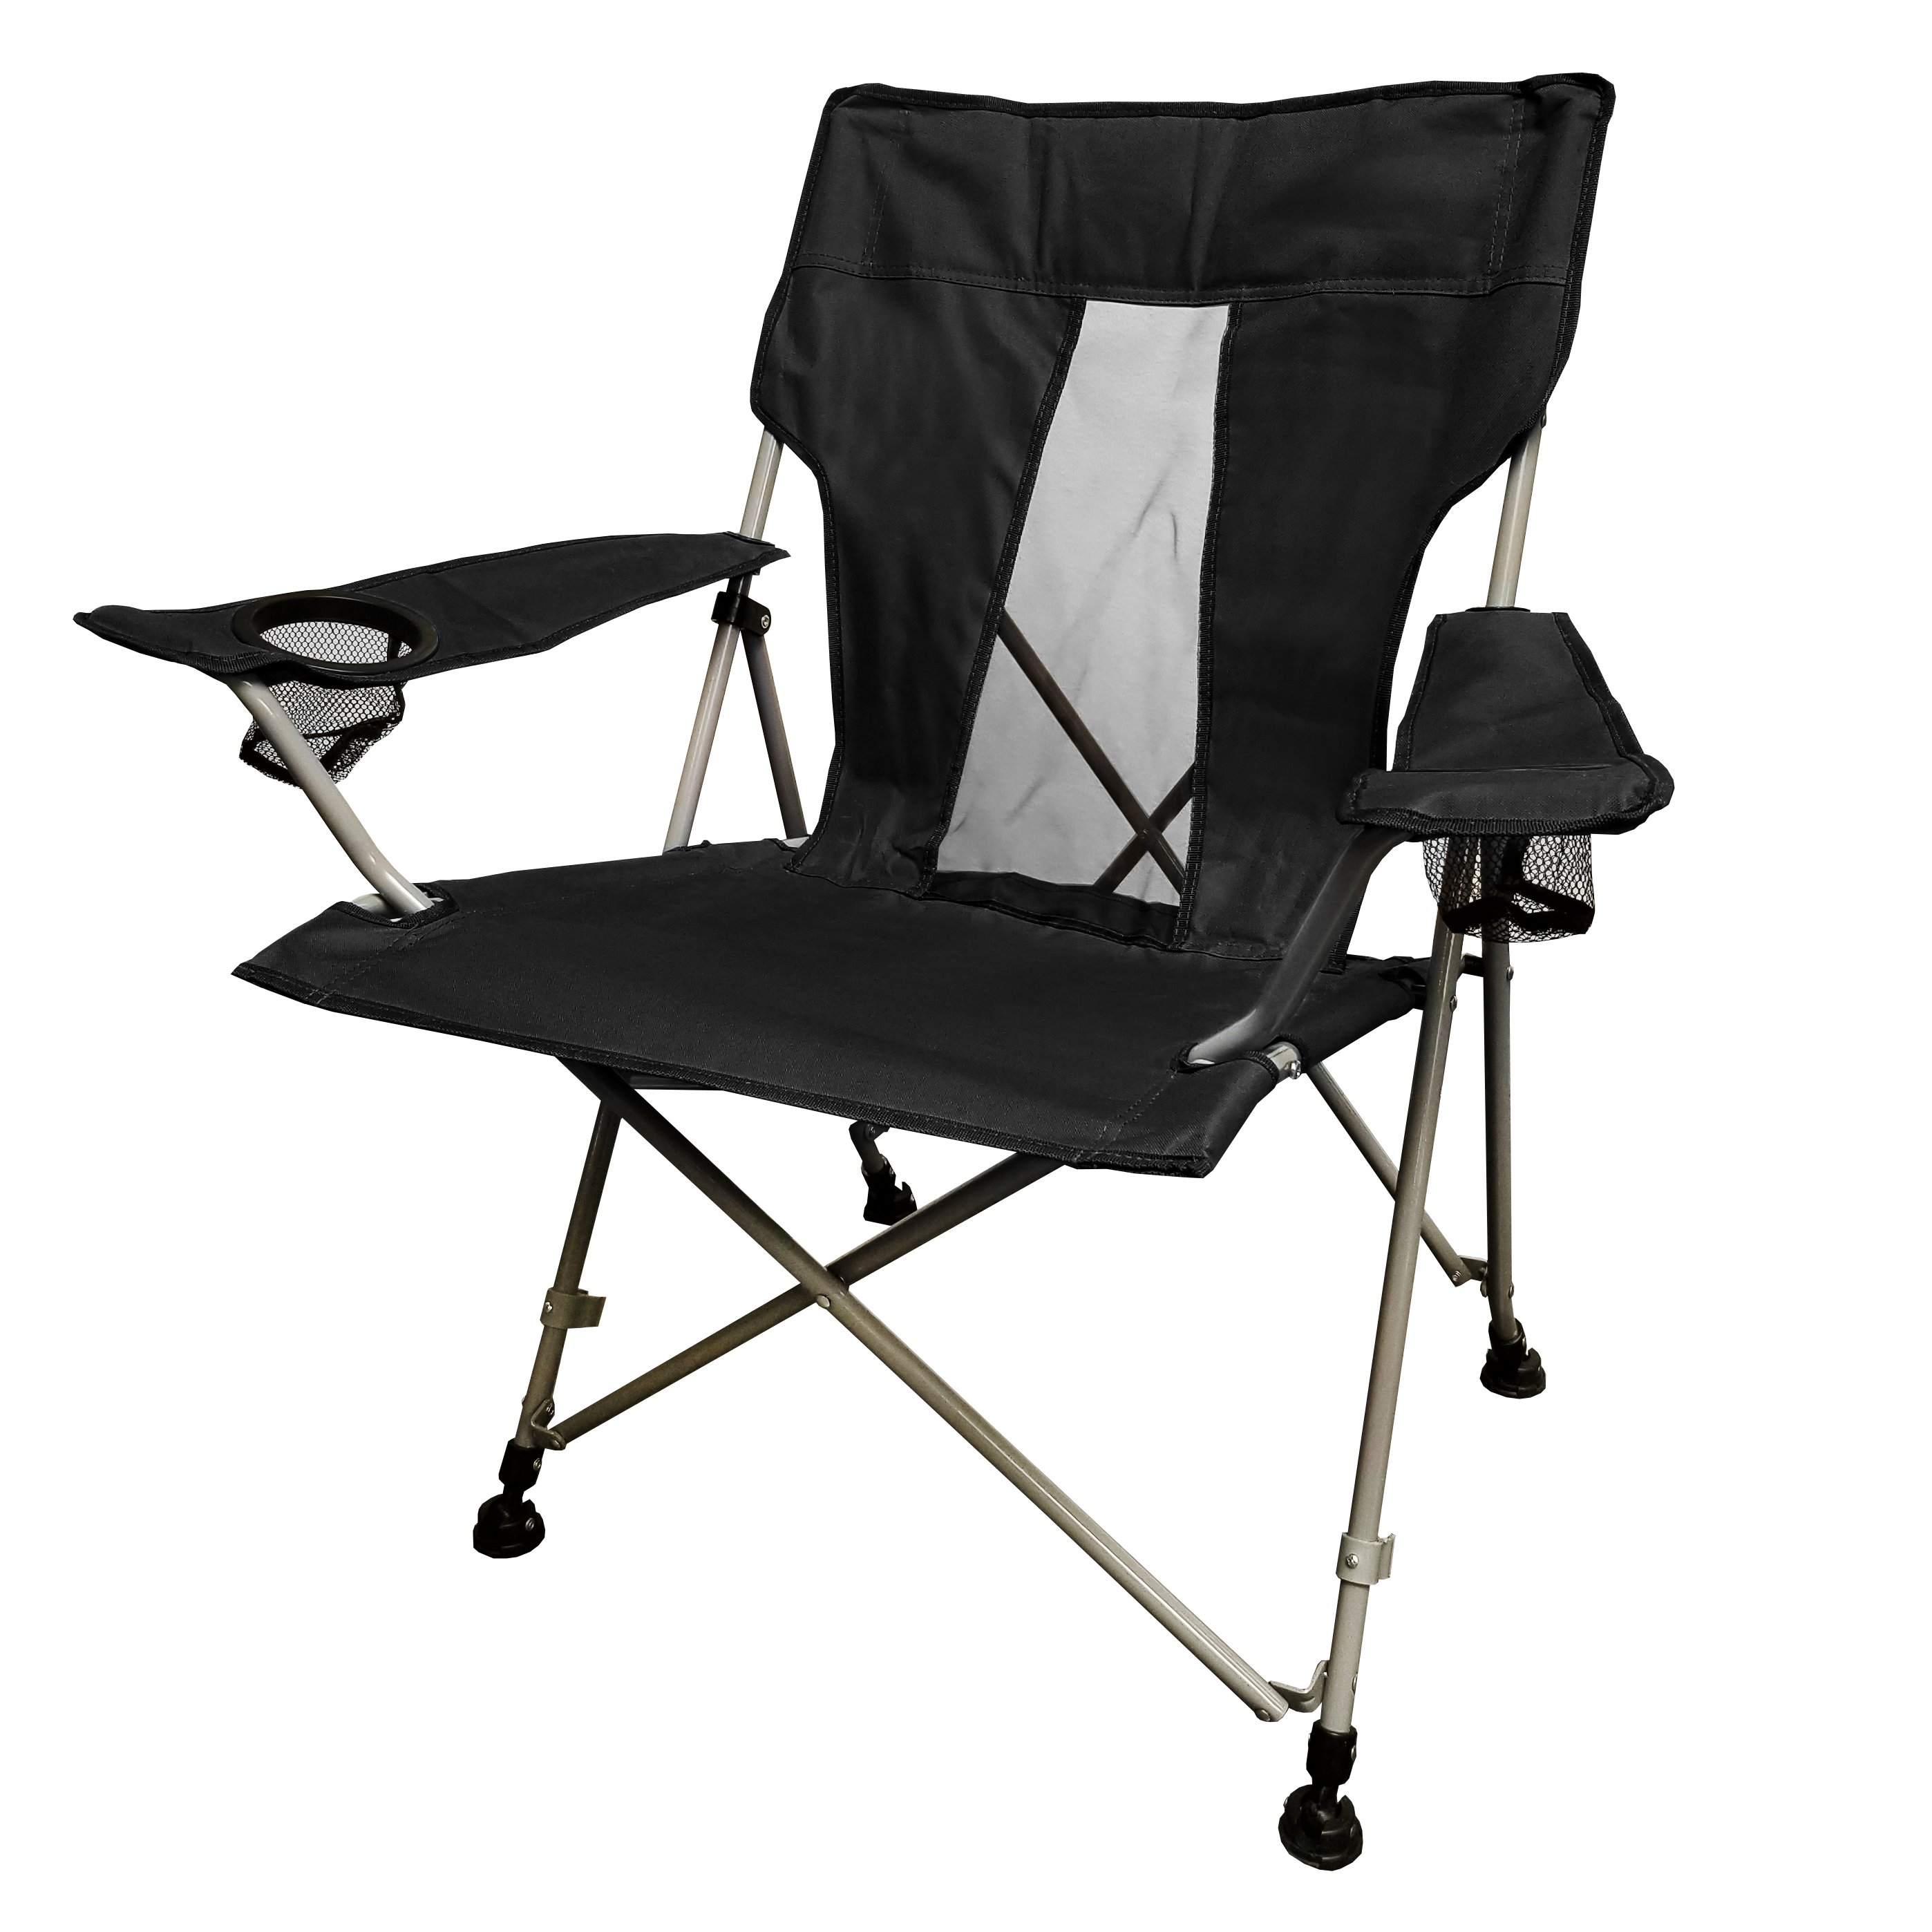 Caravan Sports Vented Back Quad Outdoor Folding Chair - Black - Shop Chairs  & Seating at H-E-B